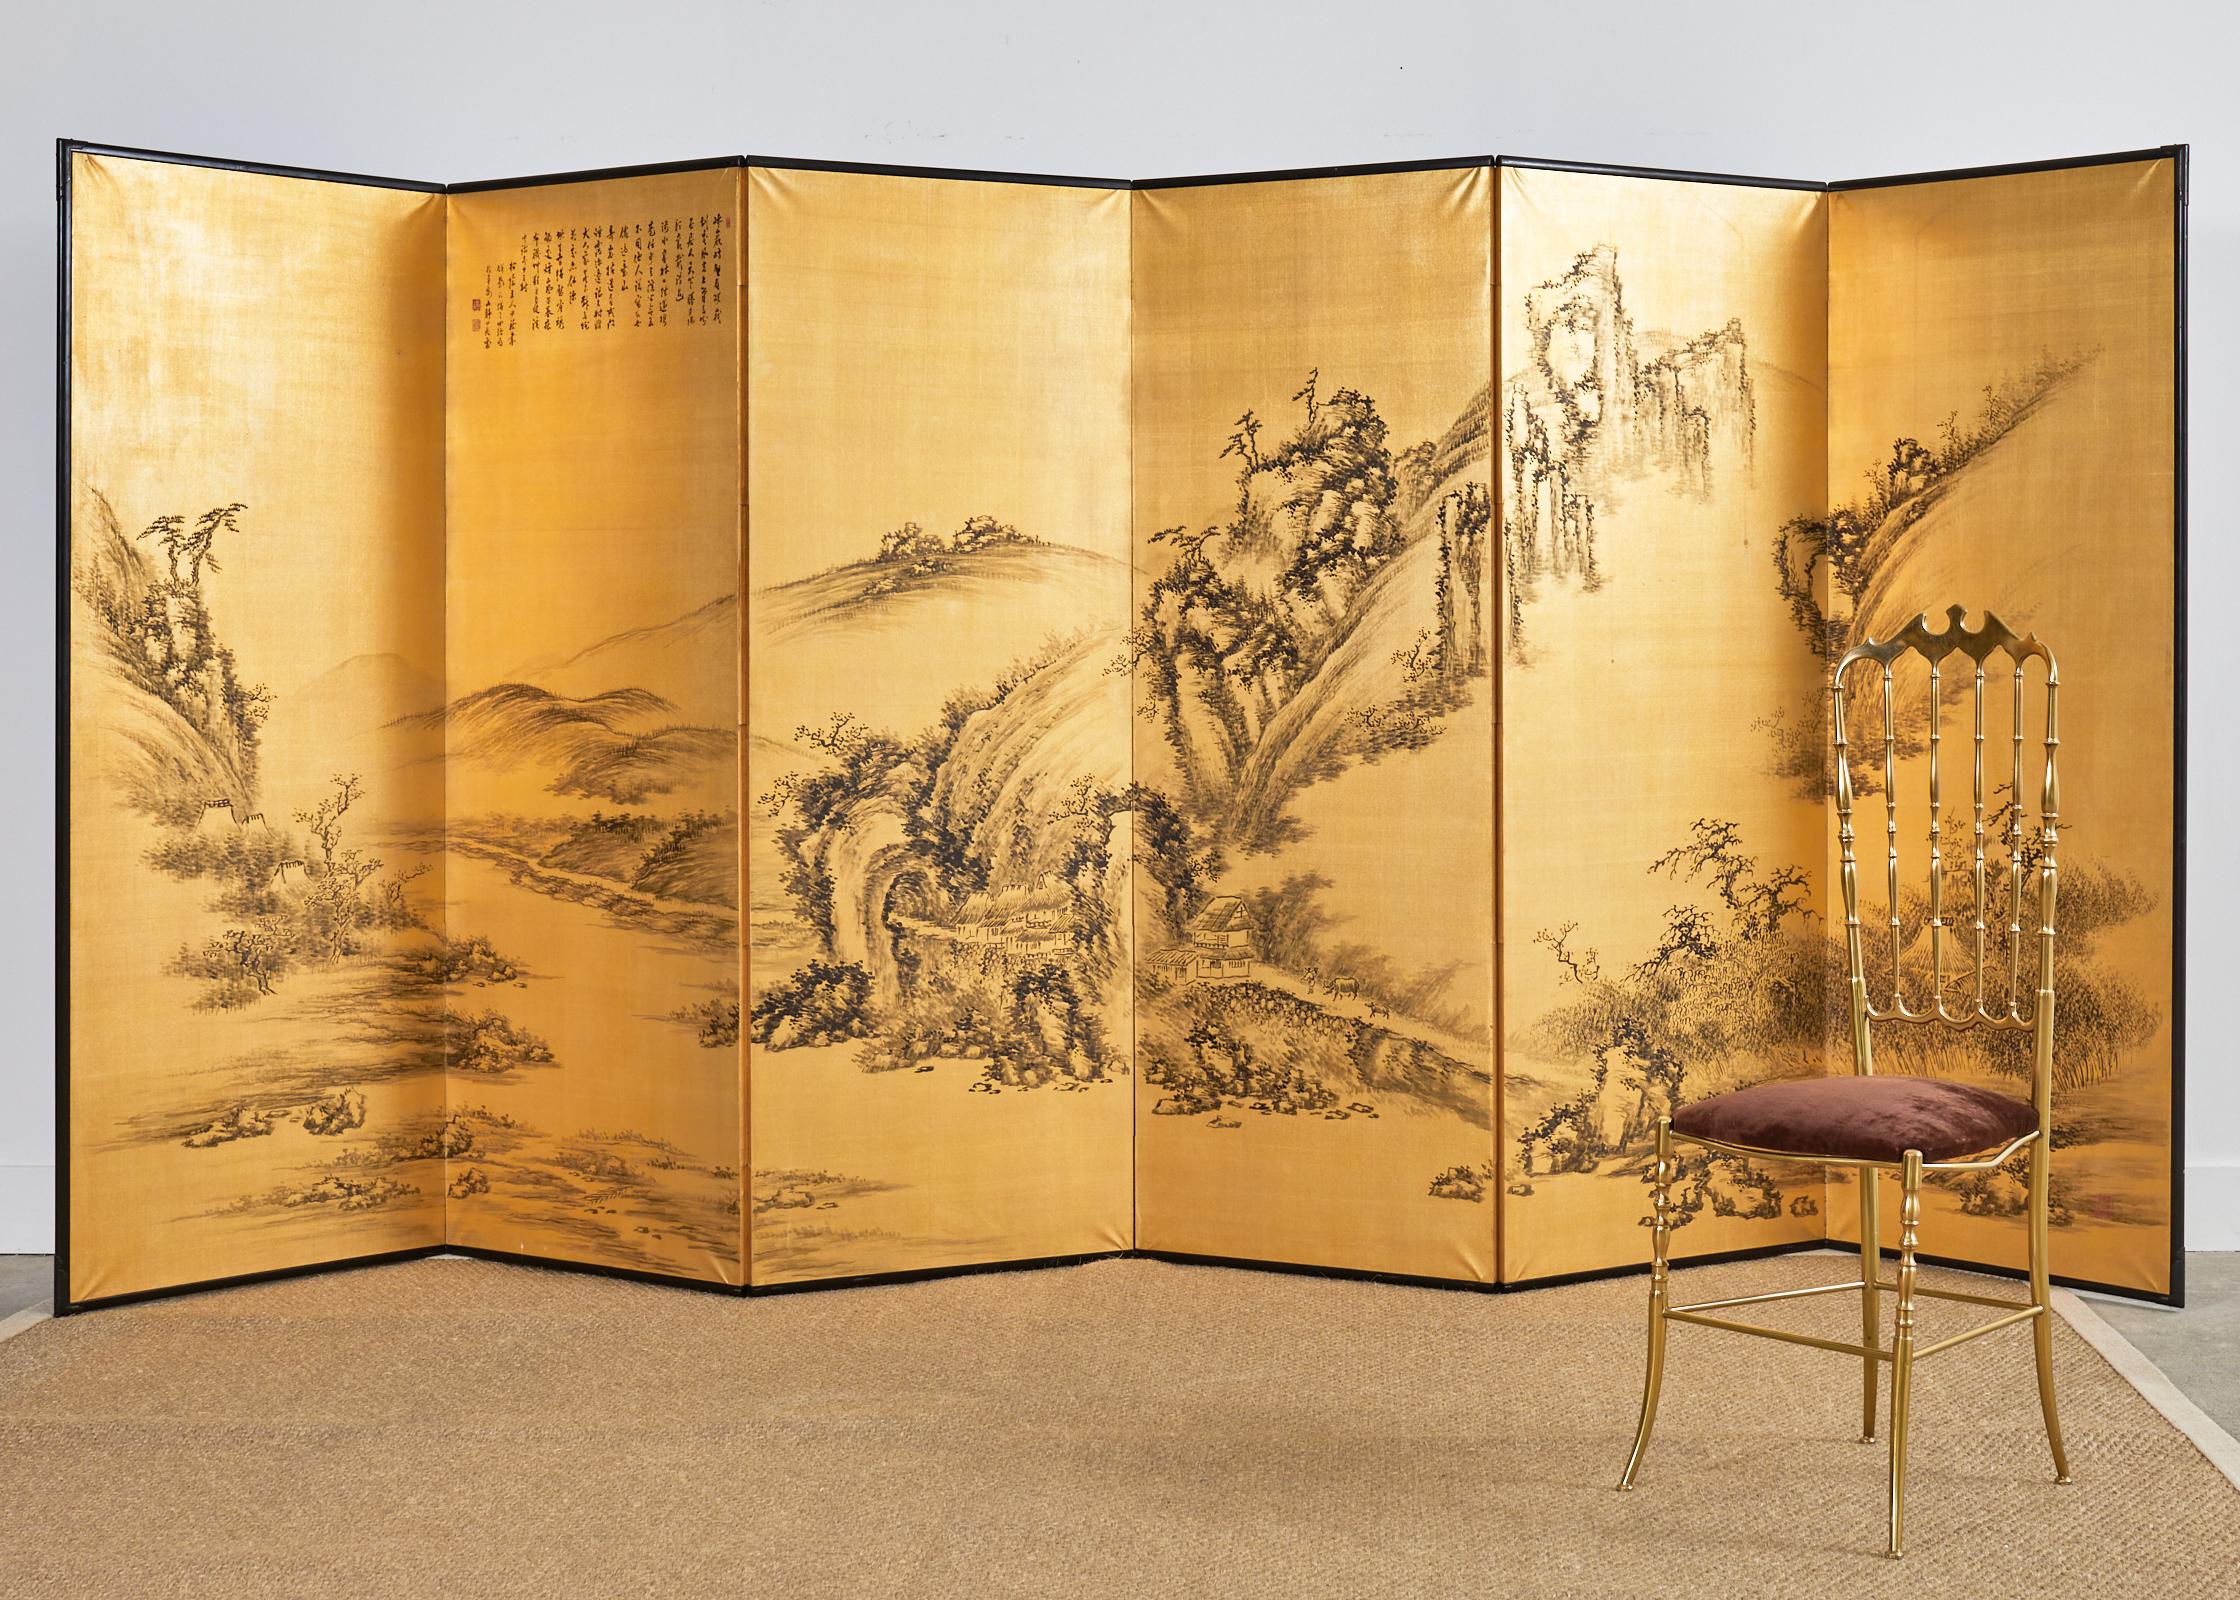 Impressive Japanese style Showa period six-panel byobu screen featuring a serene Chinese mountain landscape along a waterway over a dramatic gilt background. The painting is accompanied by a long poetic colophon in Chinese signed by the